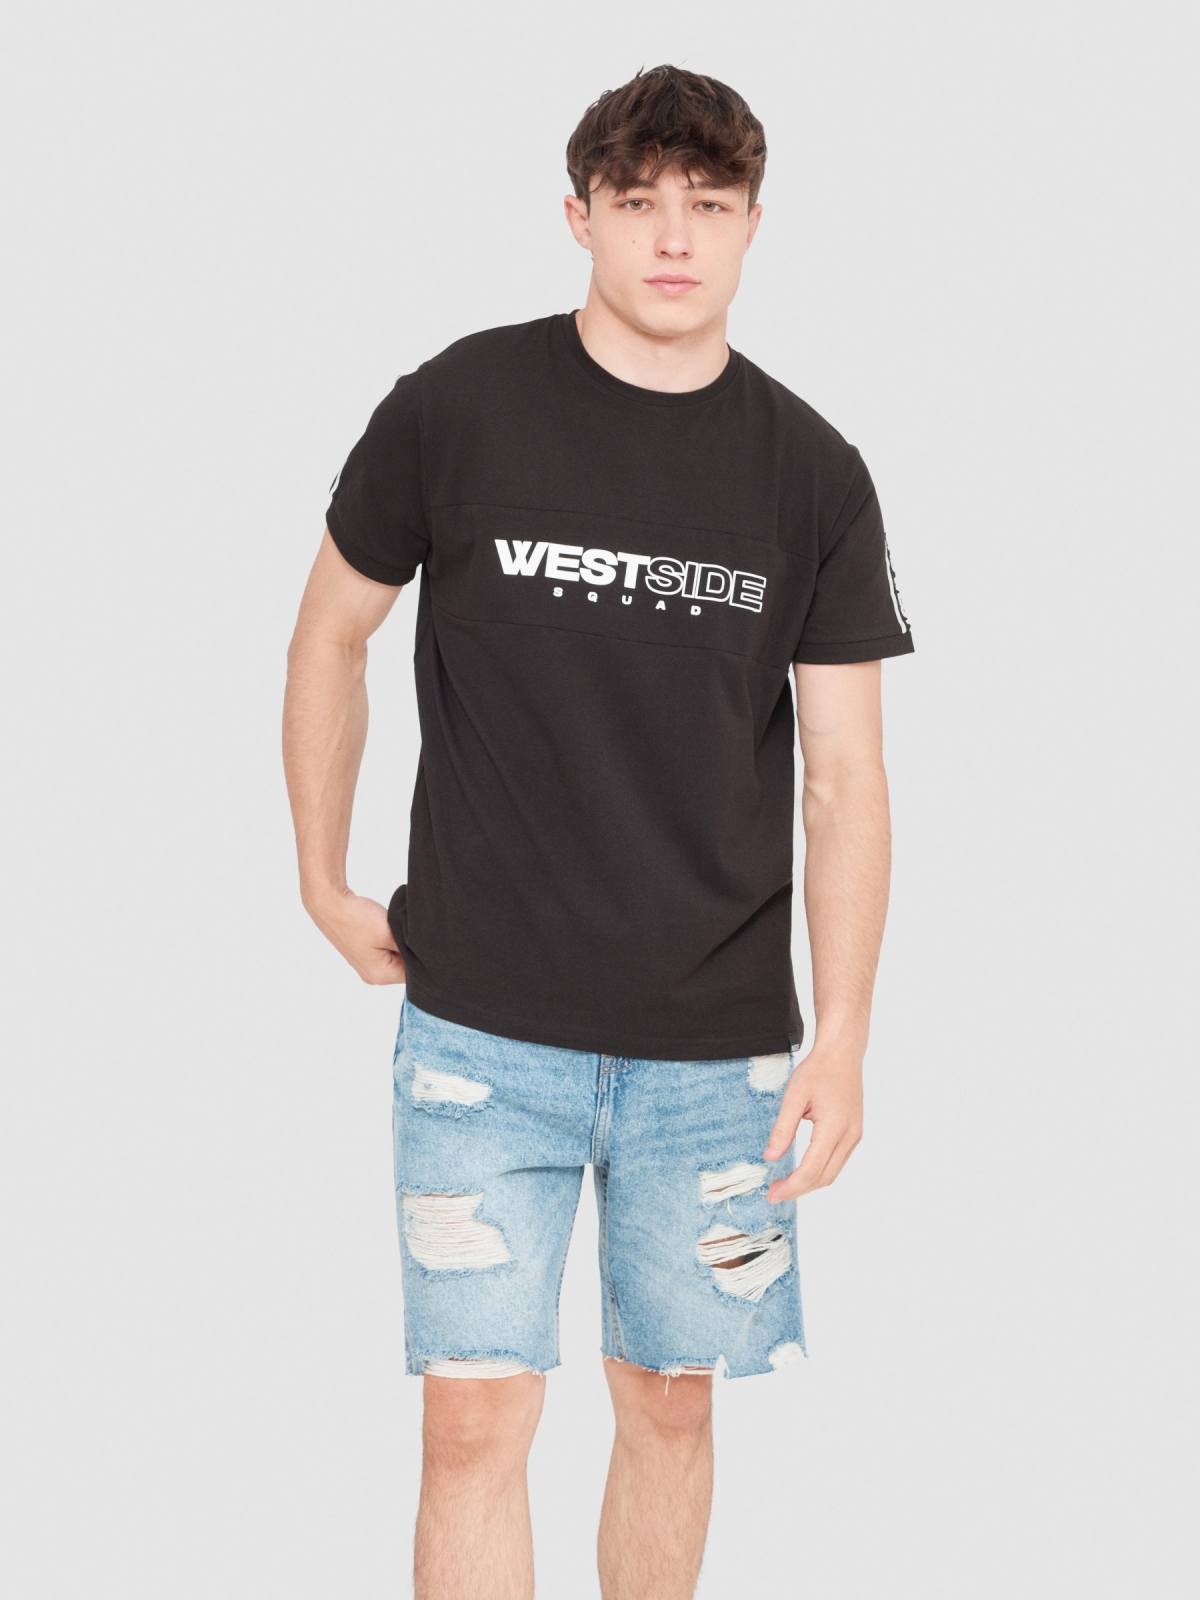 Westside T-shirt black middle front view